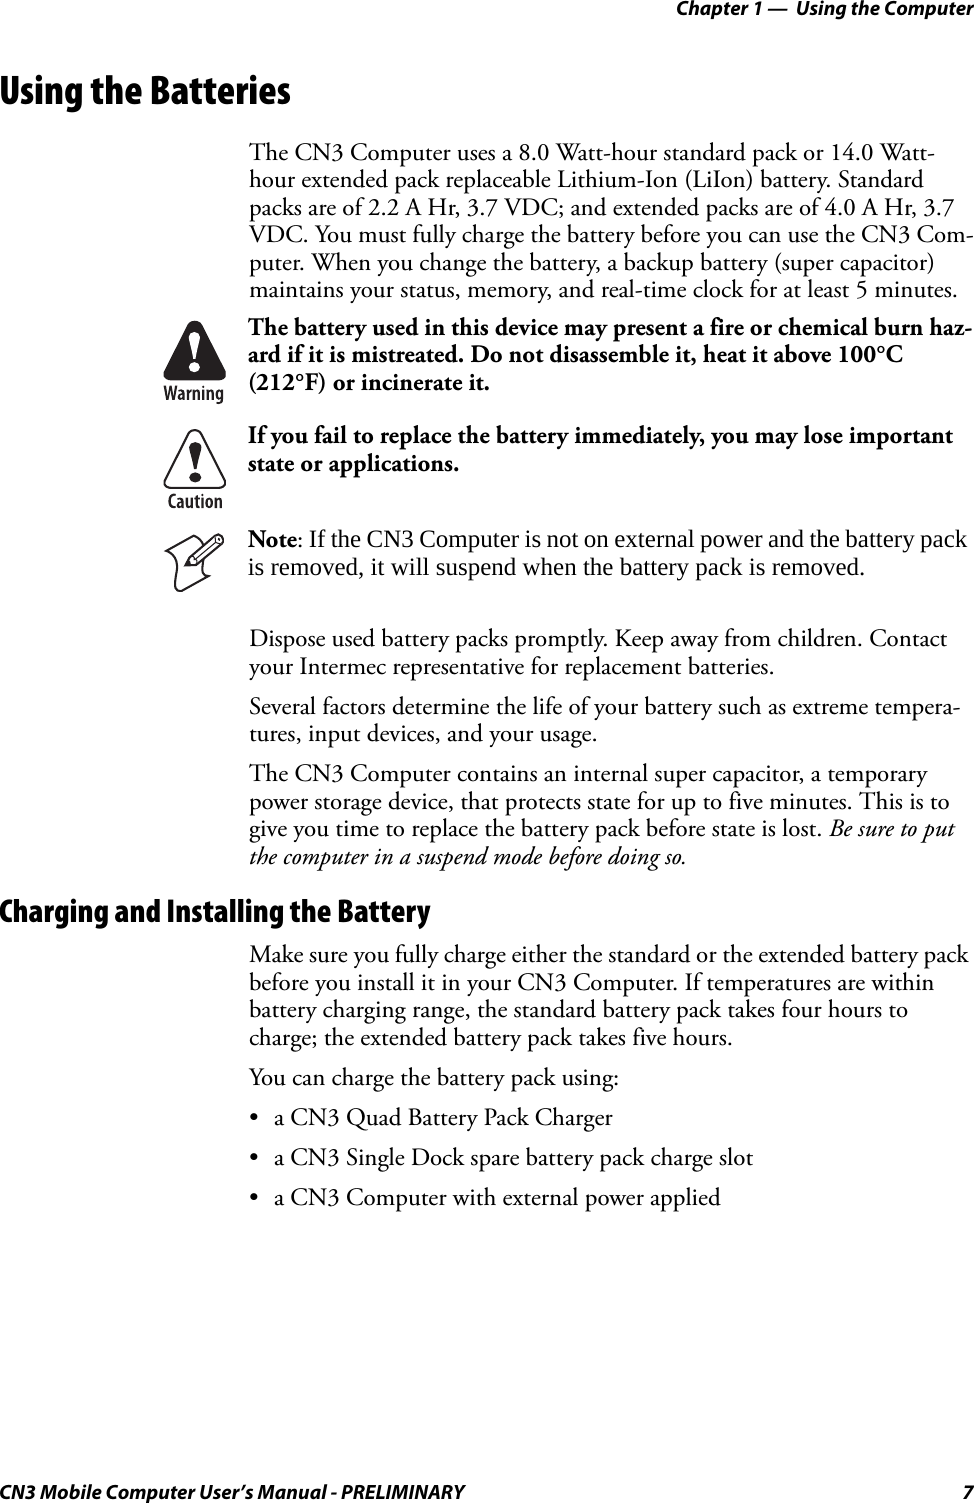 Chapter 1 —  Using the ComputerCN3 Mobile Computer User’s Manual - PRELIMINARY 7Using the BatteriesThe CN3 Computer uses a 8.0 Watt-hour standard pack or 14.0 Watt-hour extended pack replaceable Lithium-Ion (LiIon) battery. Standard packs are of 2.2 A Hr, 3.7 VDC; and extended packs are of 4.0 A Hr, 3.7 VDC. You must fully charge the battery before you can use the CN3 Com-puter. When you change the battery, a backup battery (super capacitor) maintains your status, memory, and real-time clock for at least 5 minutes.Dispose used battery packs promptly. Keep away from children. Contact your Intermec representative for replacement batteries. Several factors determine the life of your battery such as extreme tempera-tures, input devices, and your usage.The CN3 Computer contains an internal super capacitor, a temporary power storage device, that protects state for up to five minutes. This is to give you time to replace the battery pack before state is lost. Be sure to put the computer in a suspend mode before doing so.Charging and Installing the BatteryMake sure you fully charge either the standard or the extended battery pack before you install it in your CN3 Computer. If temperatures are within battery charging range, the standard battery pack takes four hours to charge; the extended battery pack takes five hours. You can charge the battery pack using:• a CN3 Quad Battery Pack Charger• a CN3 Single Dock spare battery pack charge slot• a CN3 Computer with external power appliedThe battery used in this device may present a fire or chemical burn haz-ard if it is mistreated. Do not disassemble it, heat it above 100°C (212°F) or incinerate it.If you fail to replace the battery immediately, you may lose important state or applications.Note: If the CN3 Computer is not on external power and the battery pack is removed, it will suspend when the battery pack is removed.